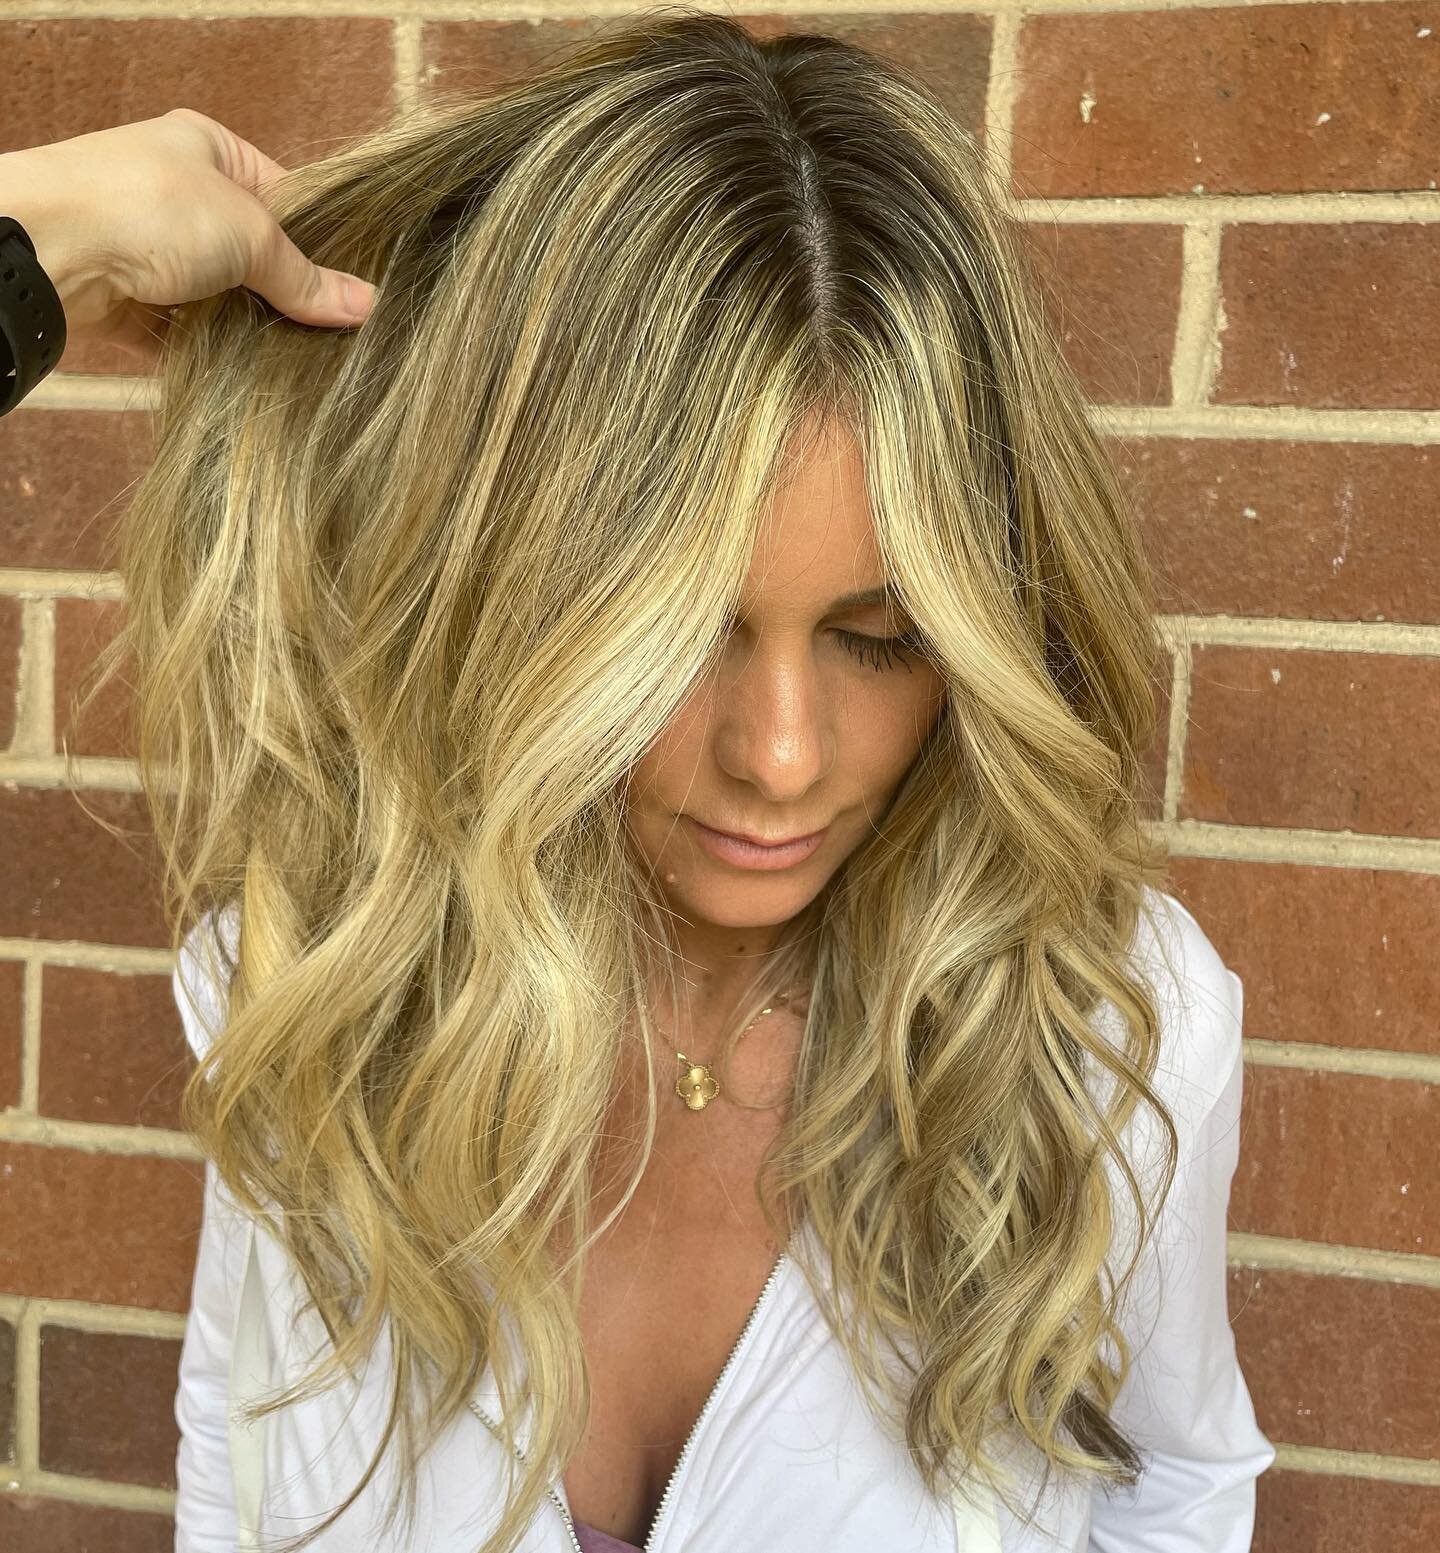 @sheena_gruber_ stunning every.single.time. I will forever love doing your hair. &hearts;️😘
#HBK #HairByKimberlyKoster #RootedBlonde #RootedBronde #SpringHair